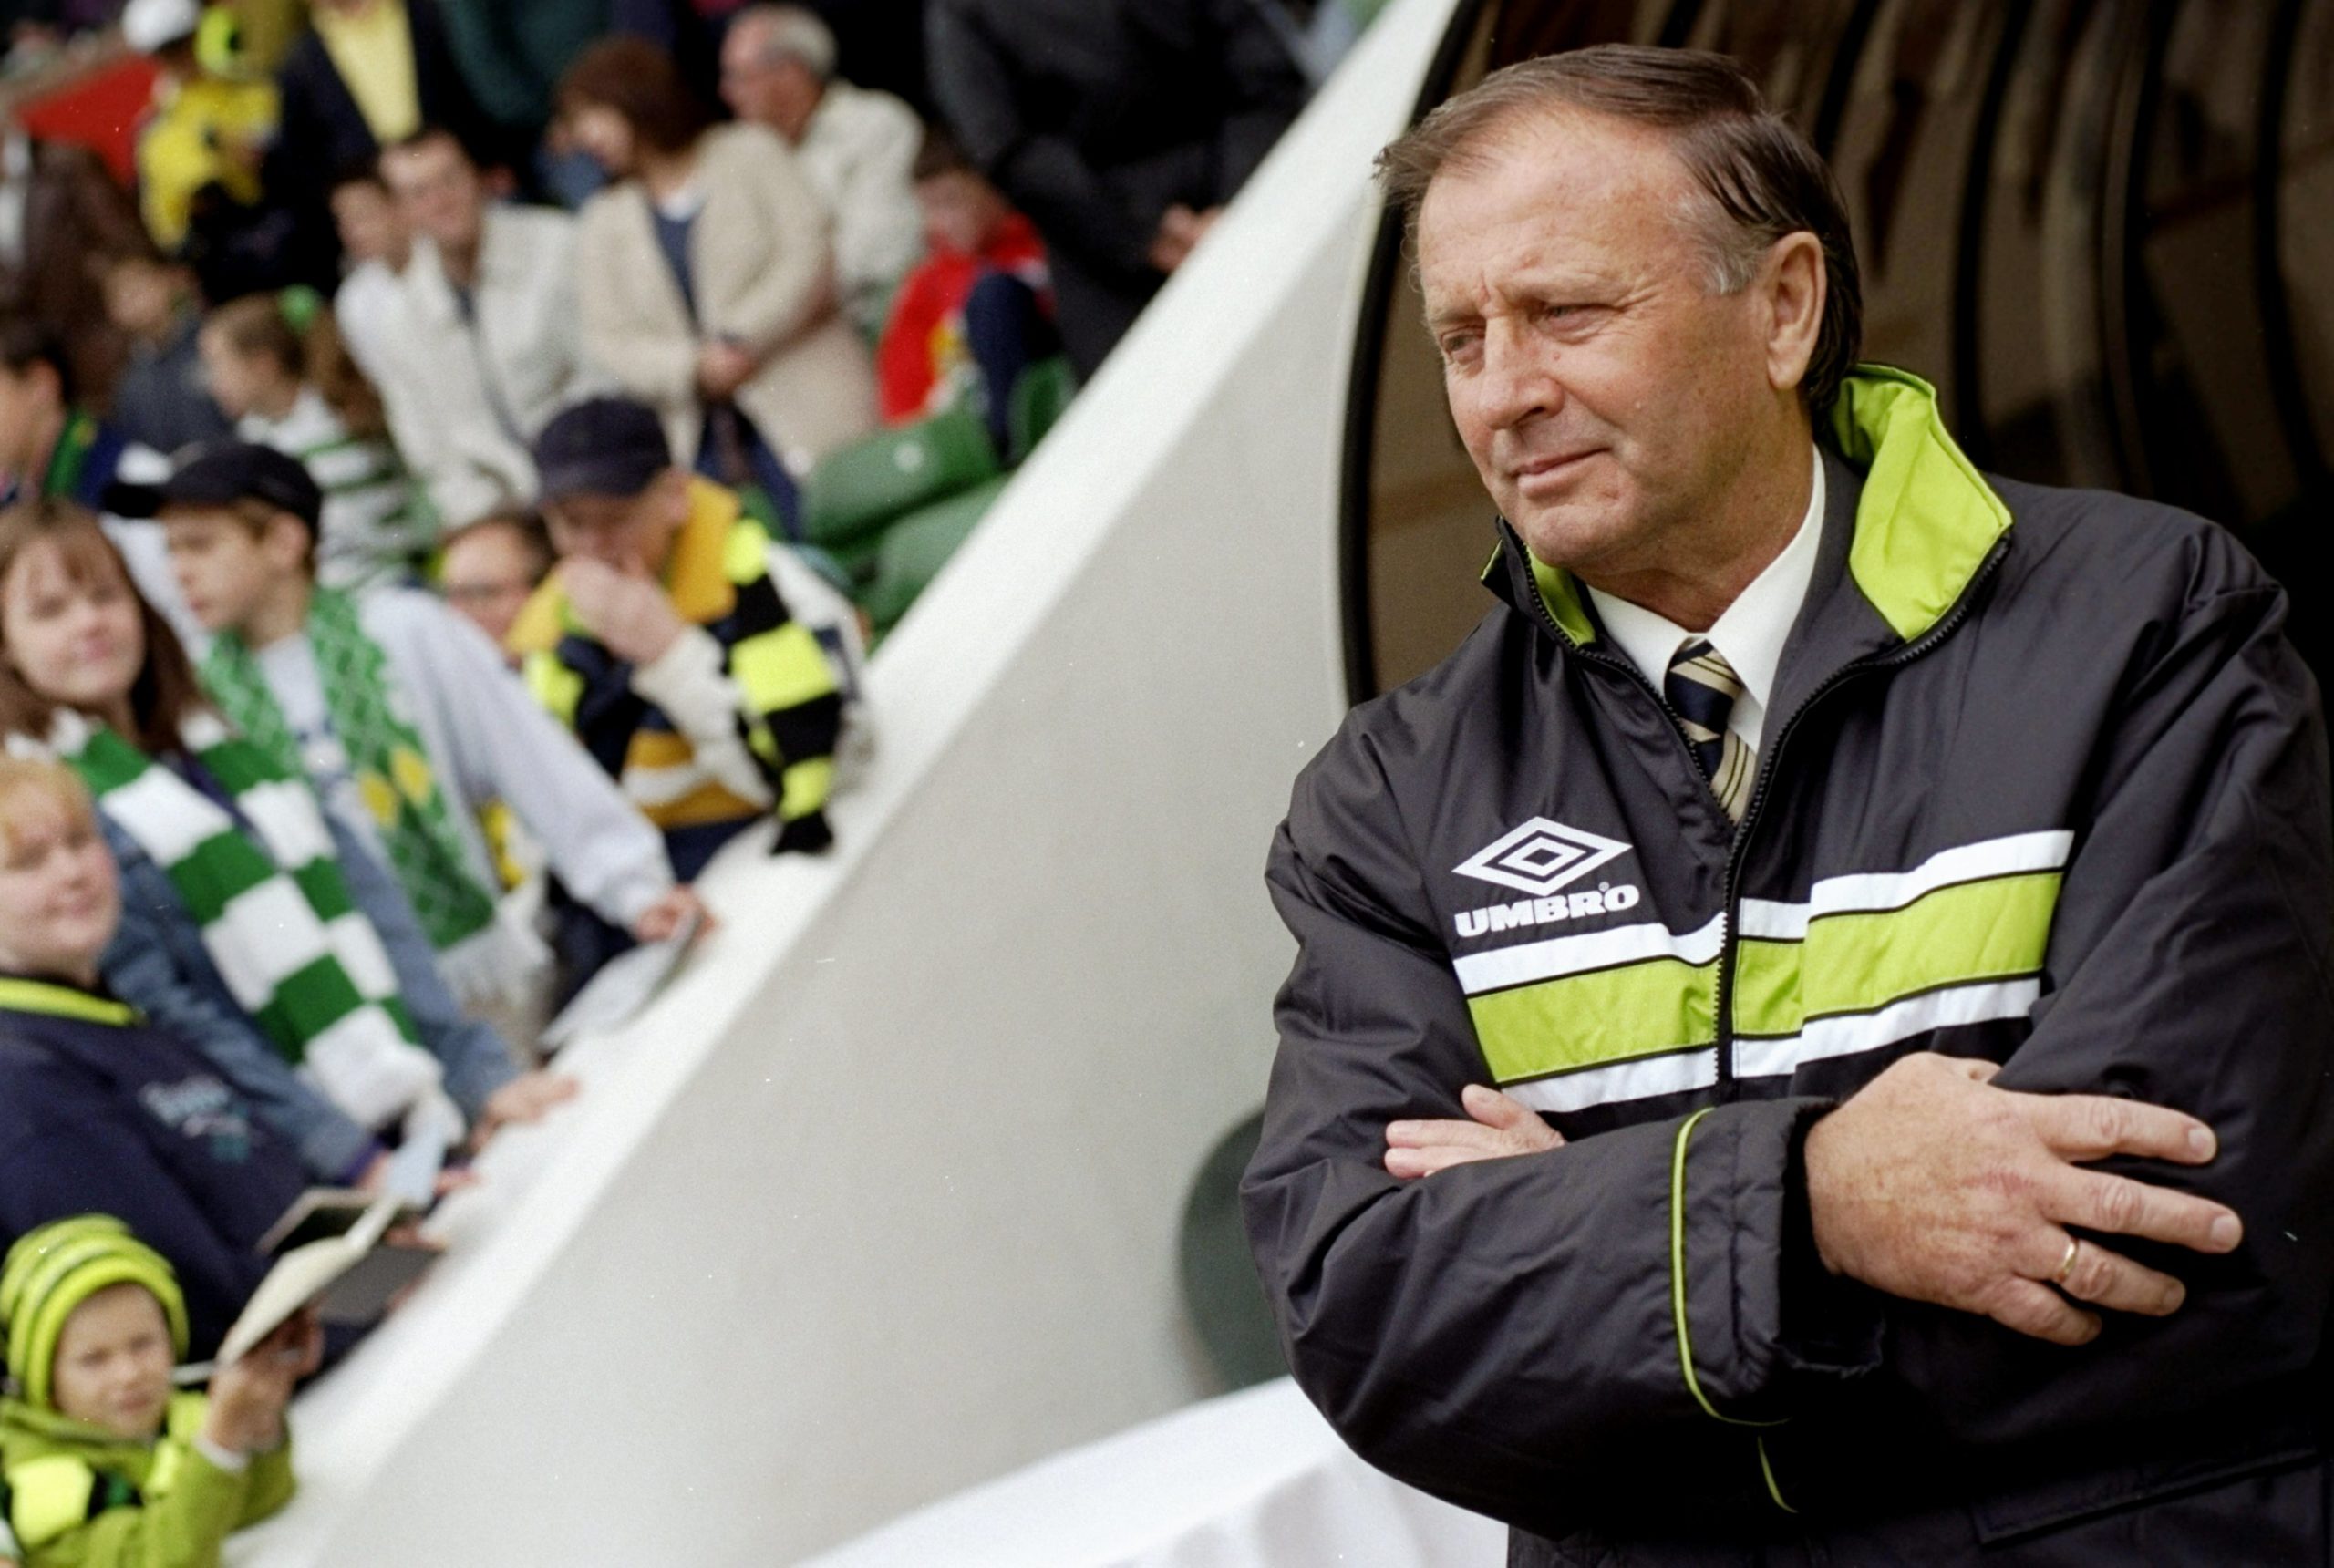 Celtic players and supporters react to passing of Dr. Jozef Venglos